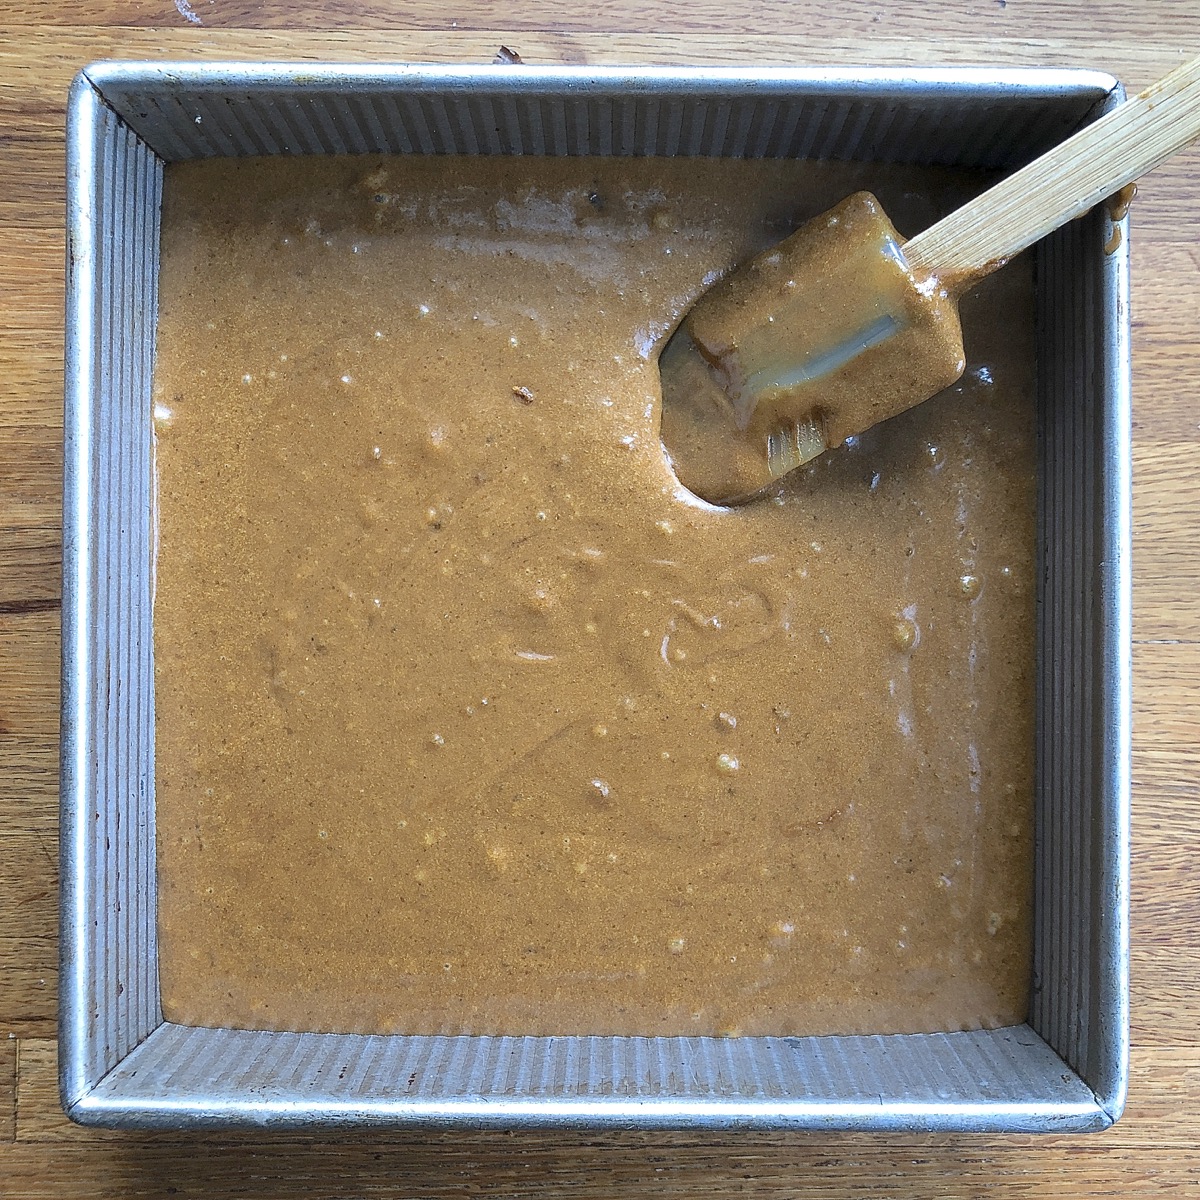 Gingerbread batter poured into a 9" square pan, ready to bake.